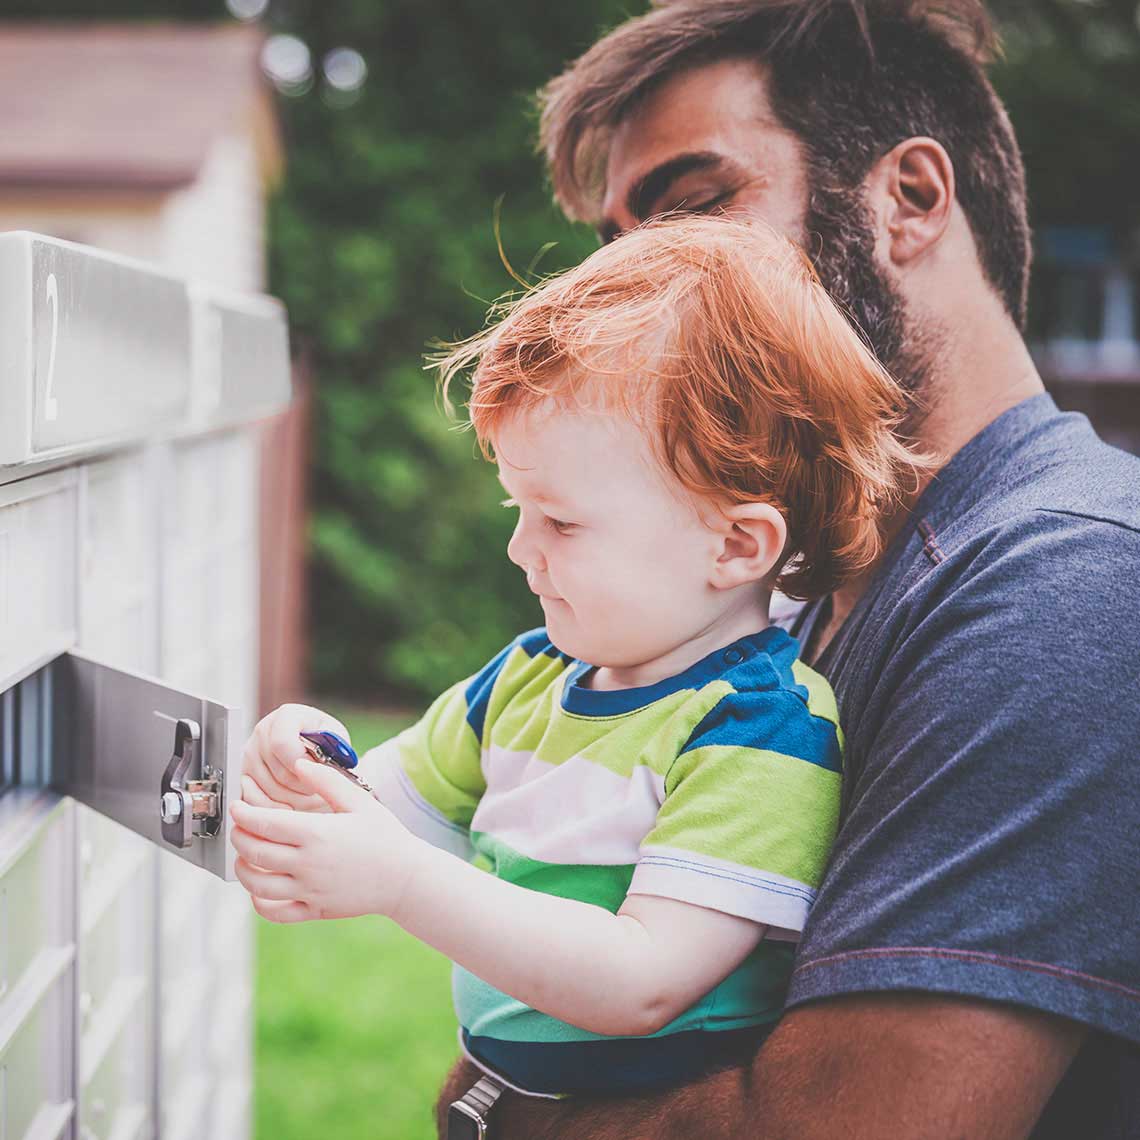 Man holding his son with keys standing at a set of communal postboxes outdoors